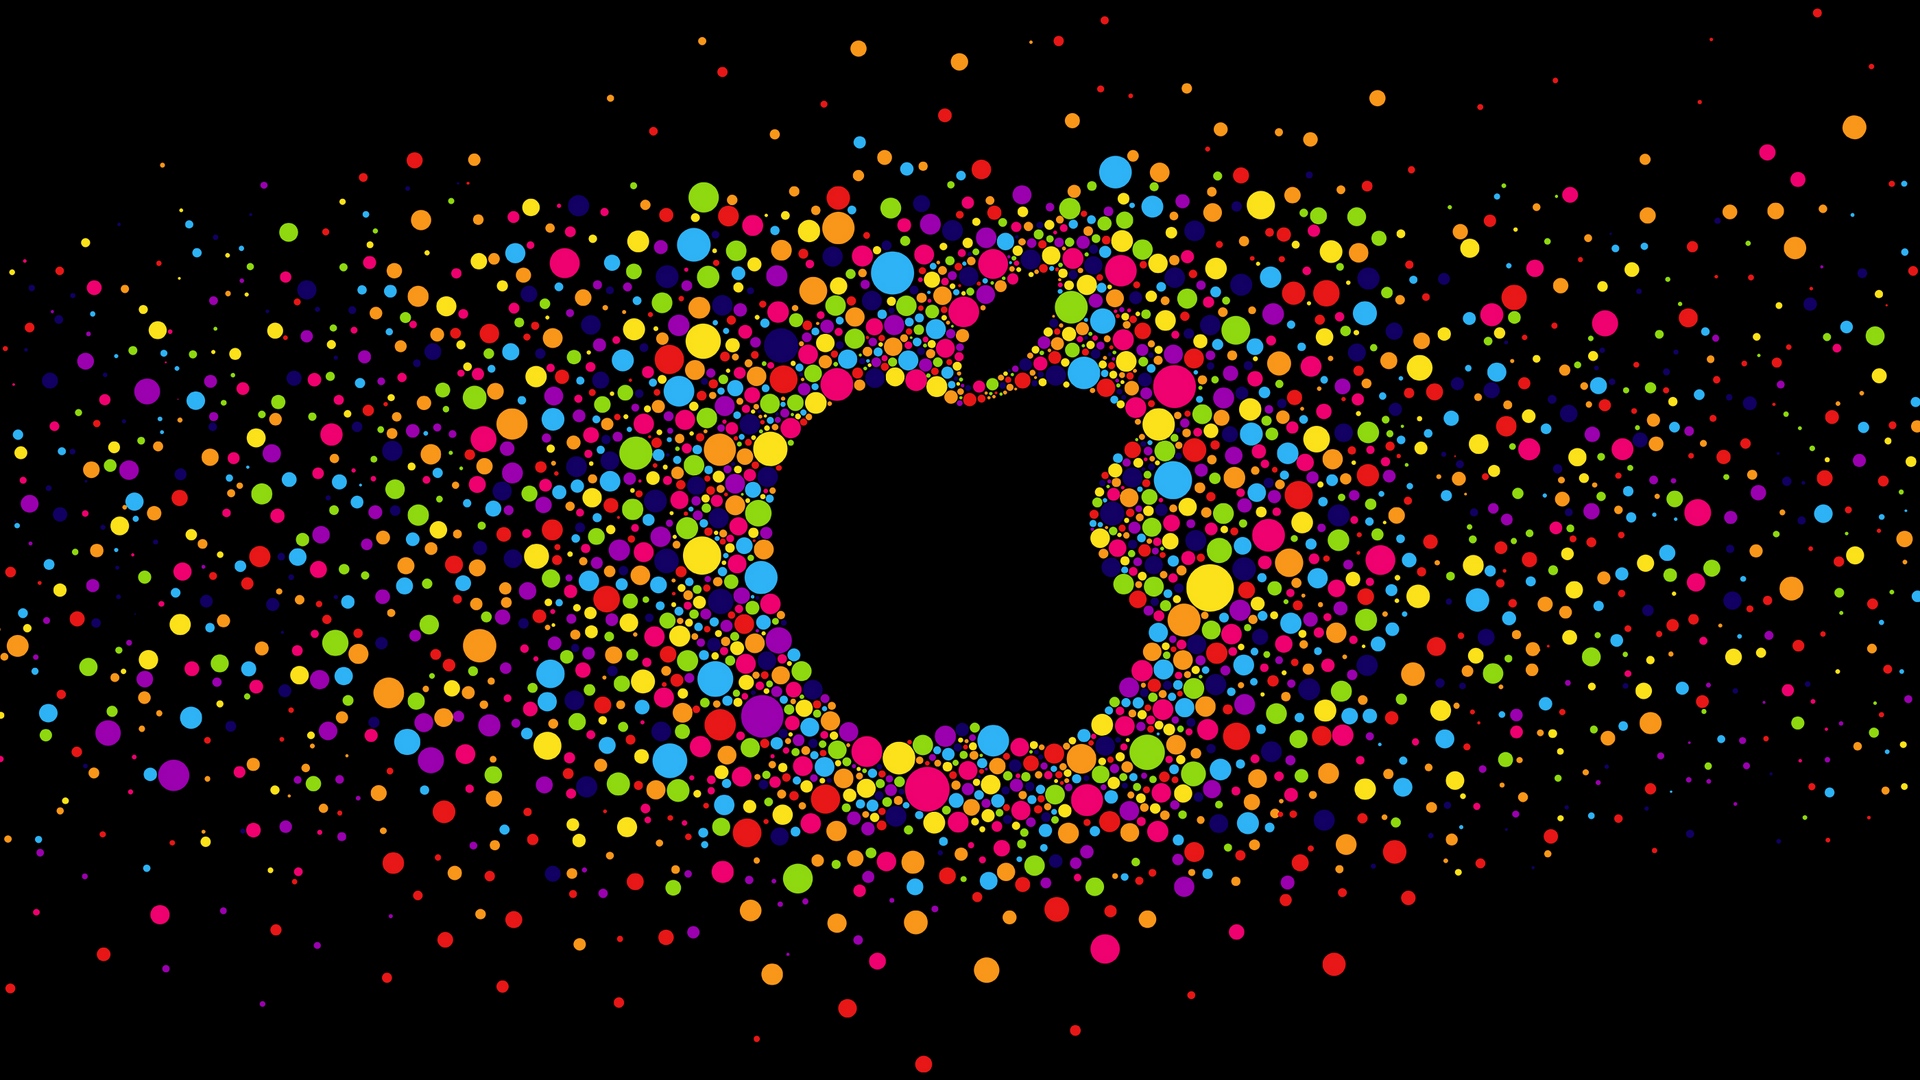 Colorful Circles With Black Background And Apple Logo - Iphone Wallpaper  Apple Logo - 1920x1080 Wallpaper 